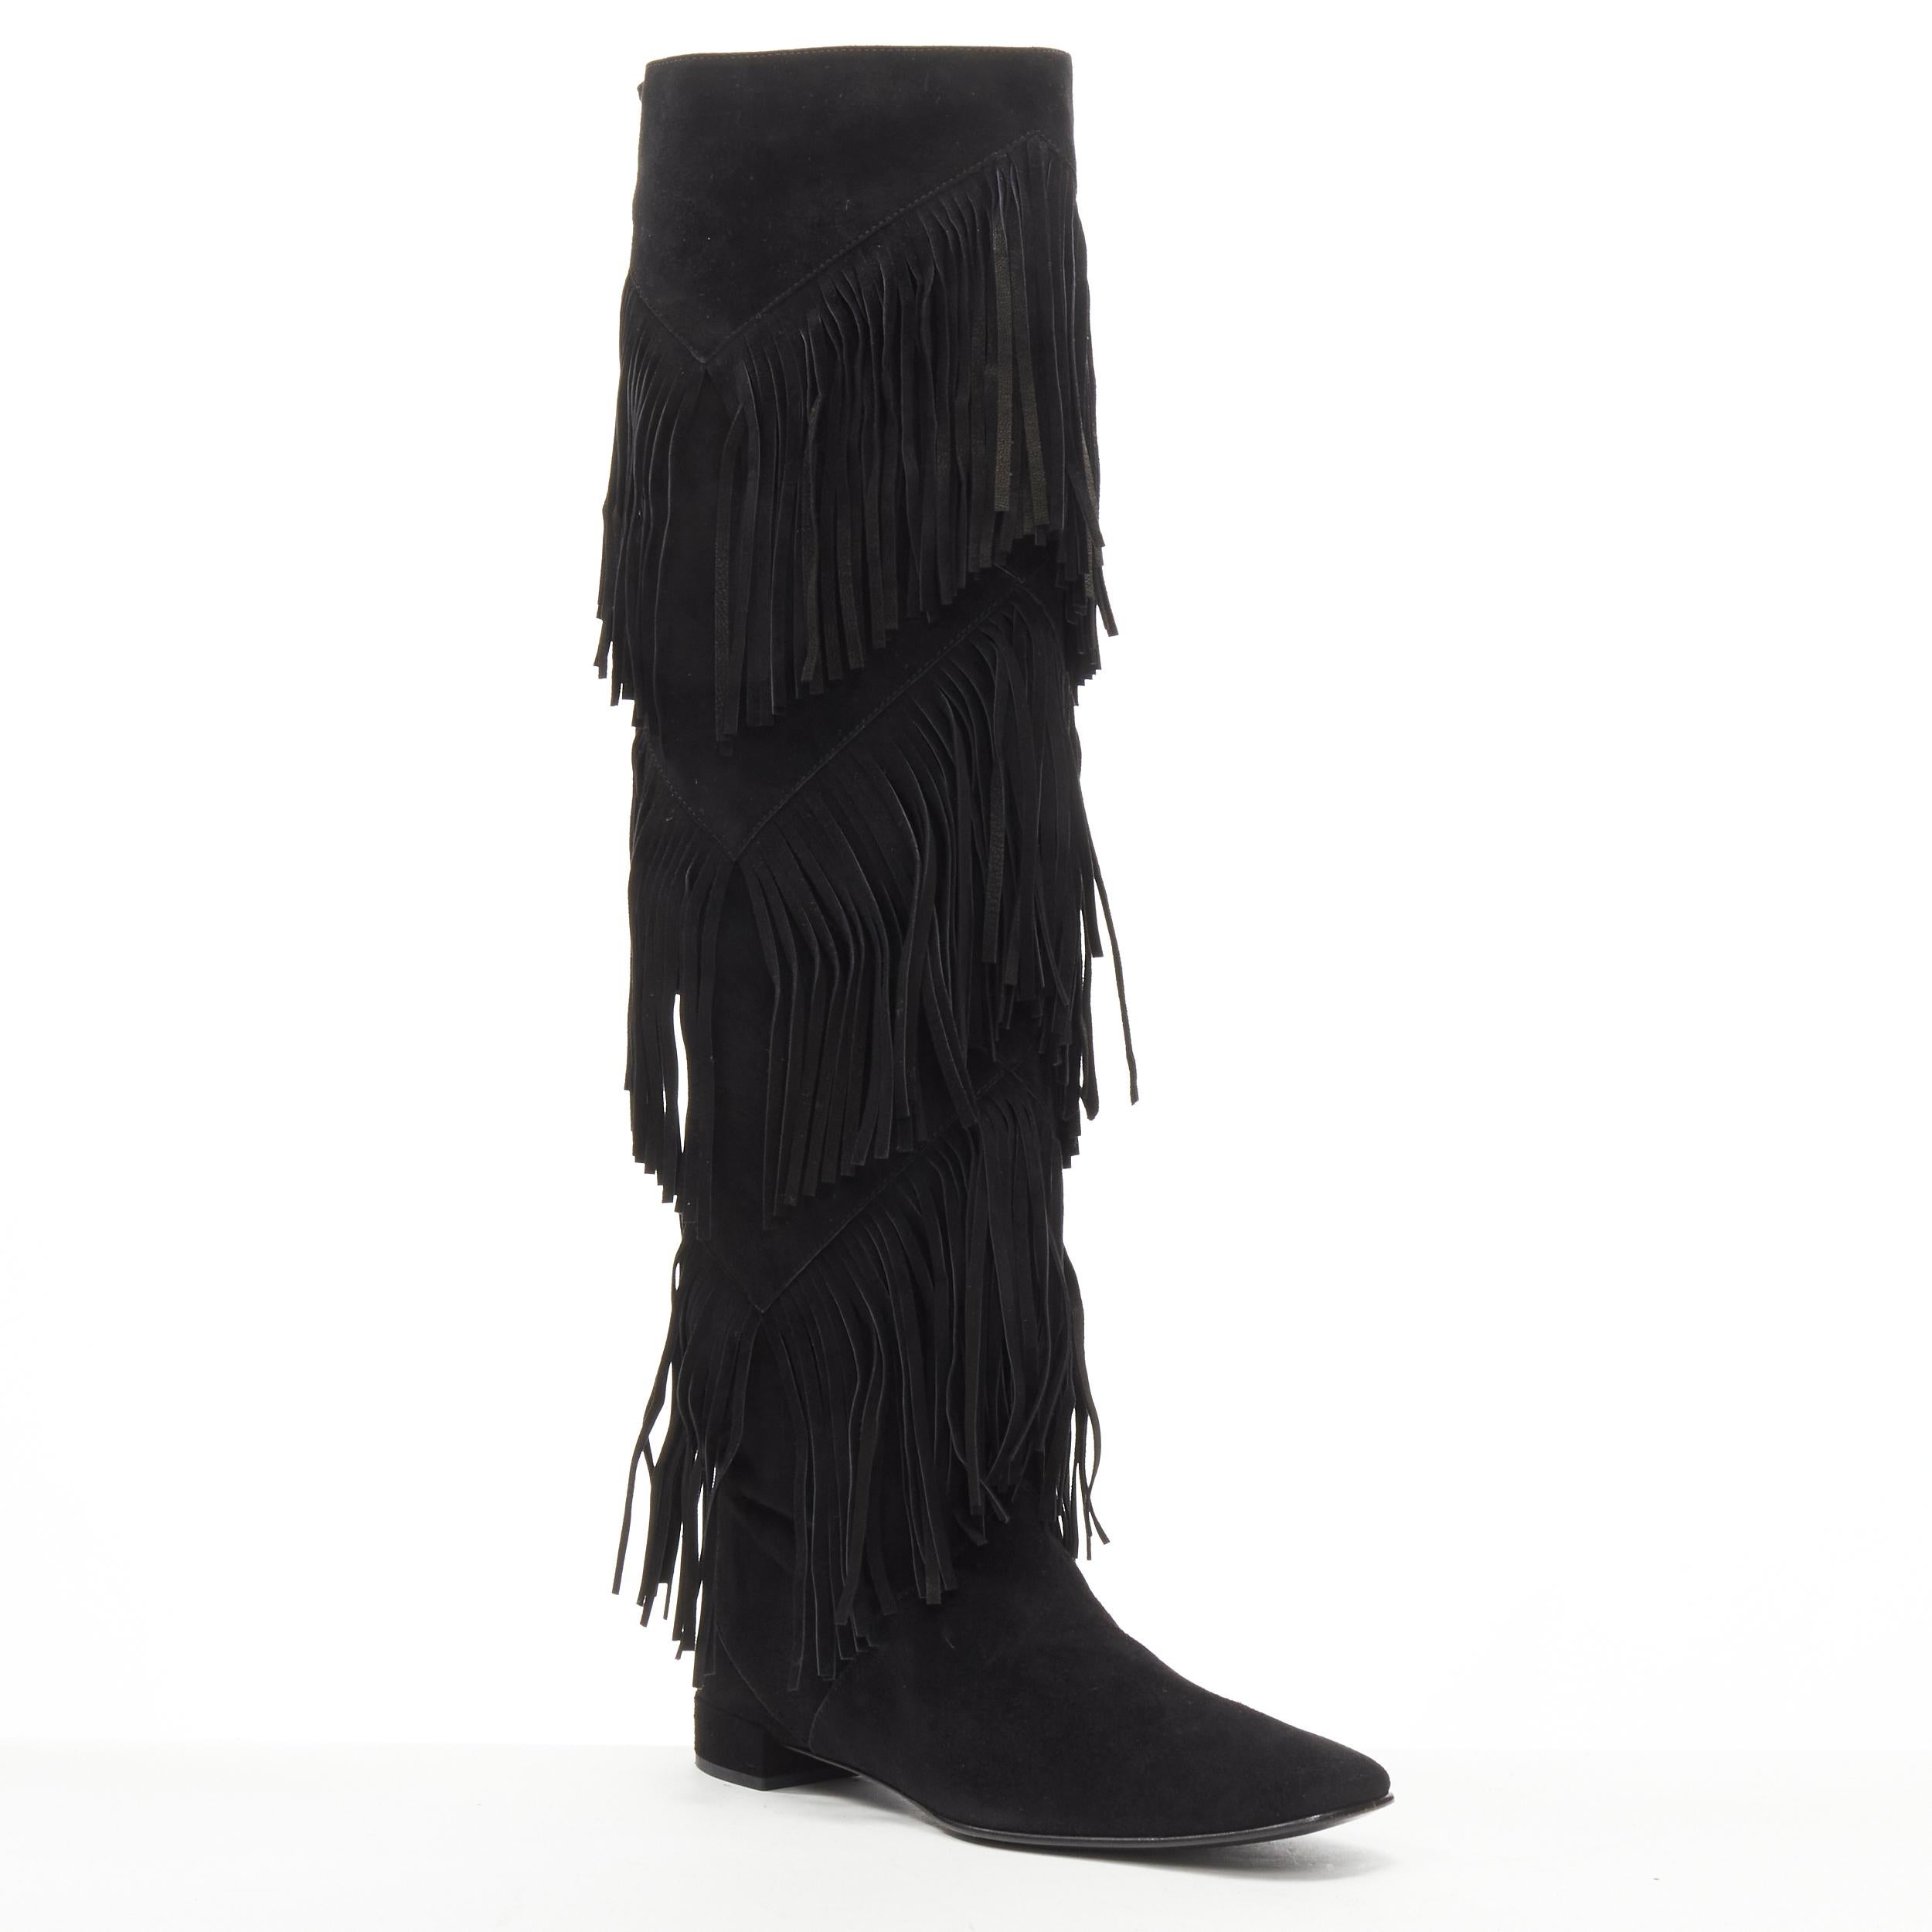 ROGER VIVIER black suede fringe trimmed pull on flat boots EU38.5 
Reference: AEMA/A00056 
Brand: Roger Vivier 
Material: Suede 
Color: Black 
Pattern: Solid 
Extra Detail: Fringe trimmed pull on boots. Suede covered heel. 
Made in: Italy